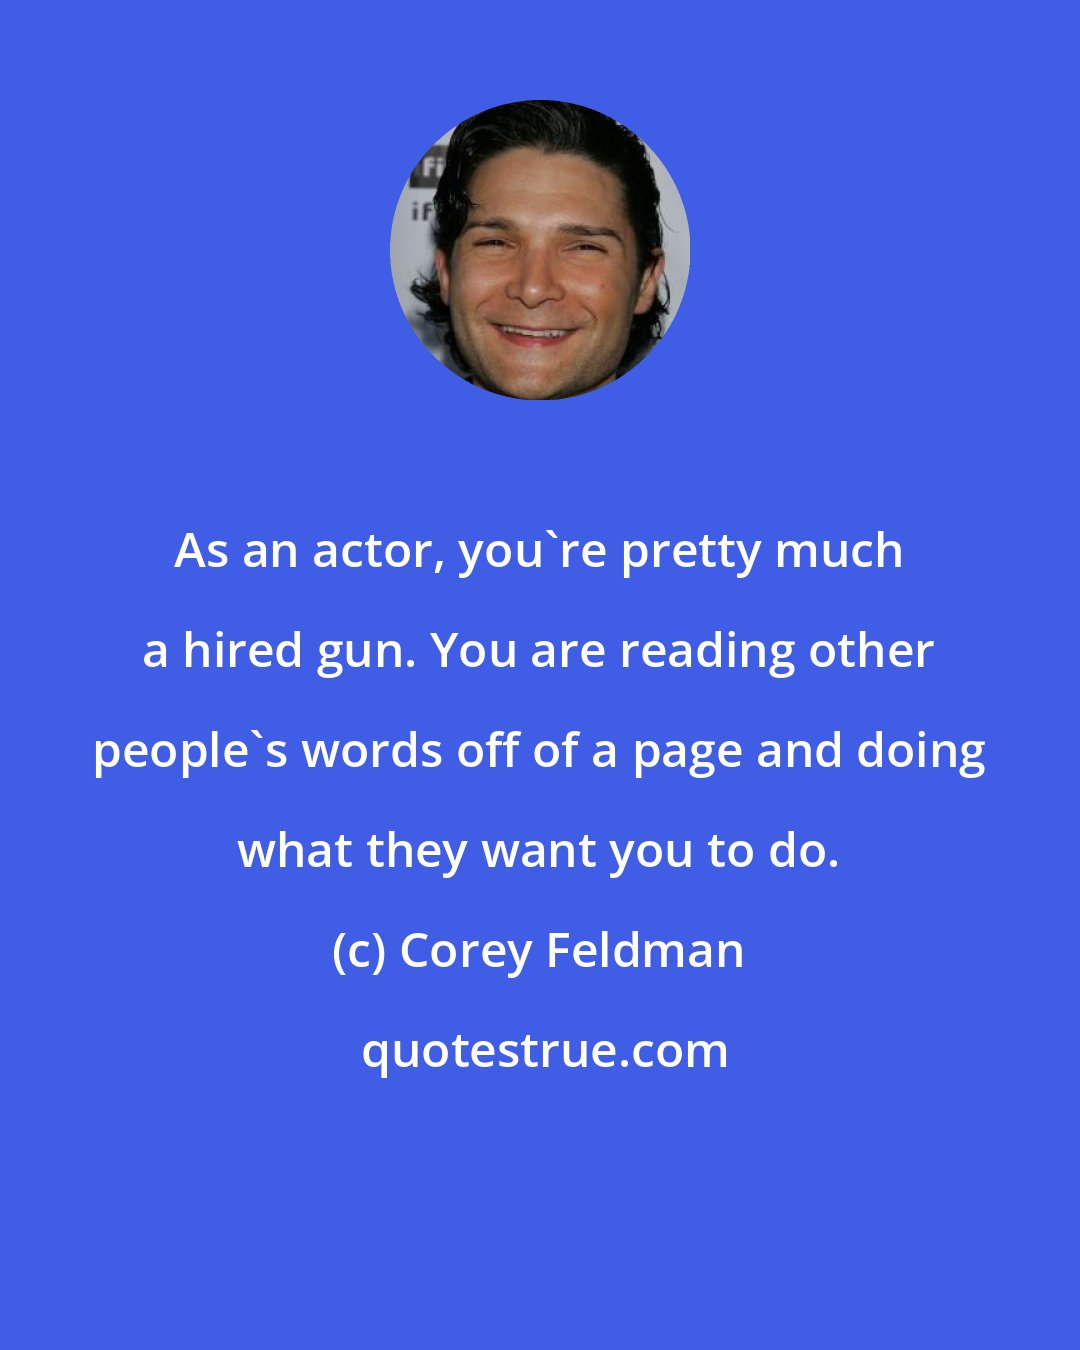 Corey Feldman: As an actor, you're pretty much a hired gun. You are reading other people's words off of a page and doing what they want you to do.